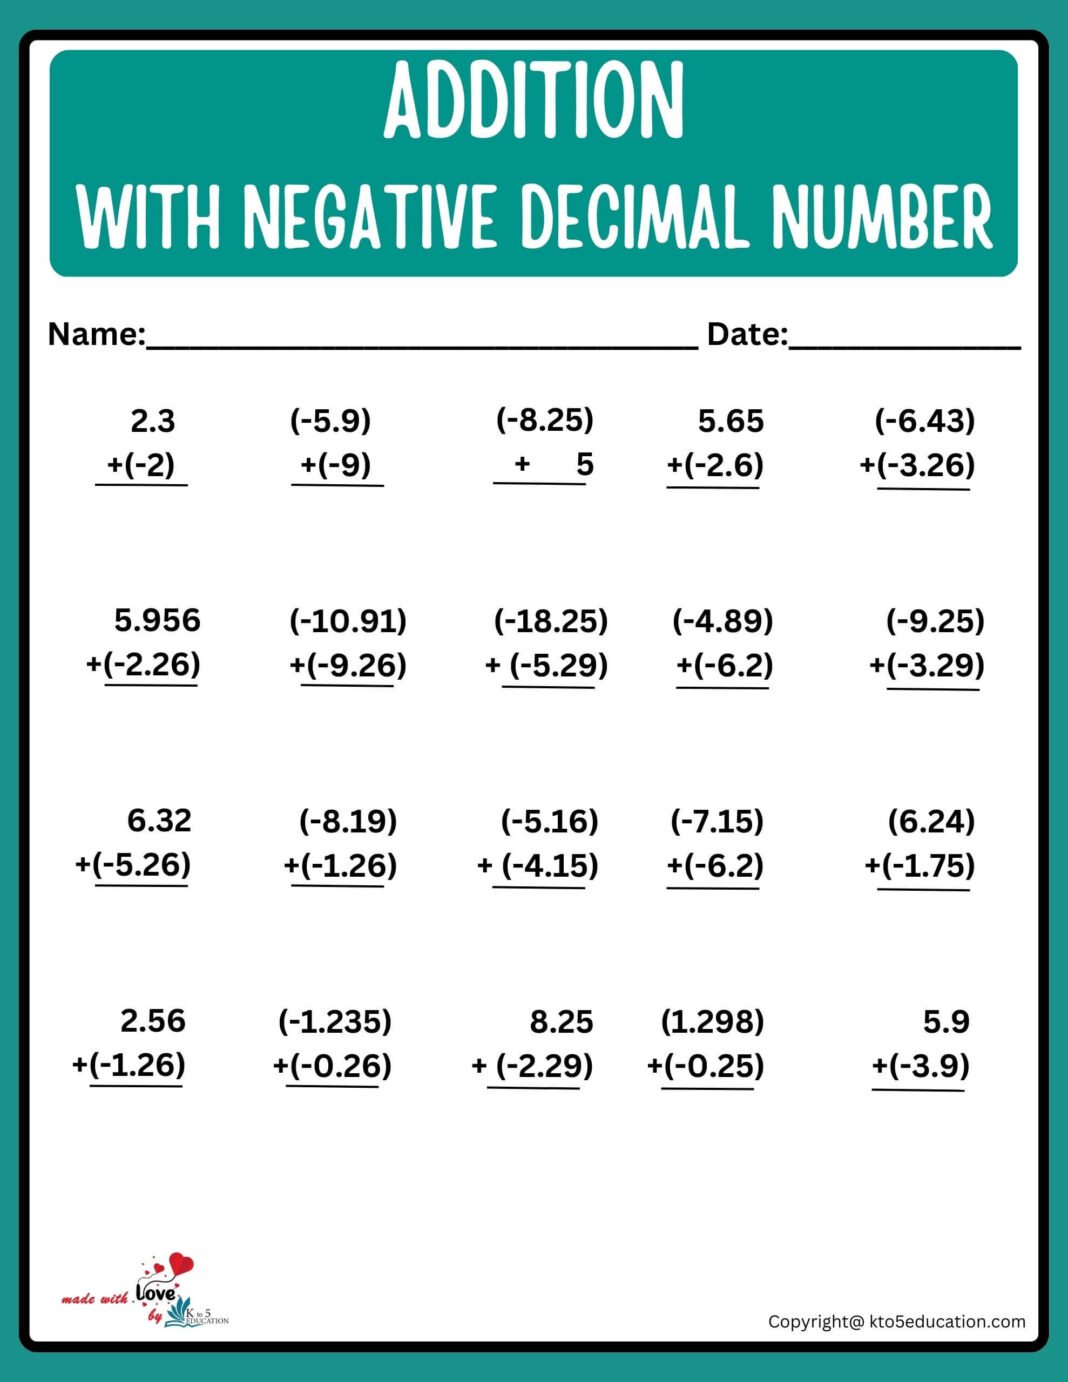 addition-with-negative-decimal-numbers-worksheet-free